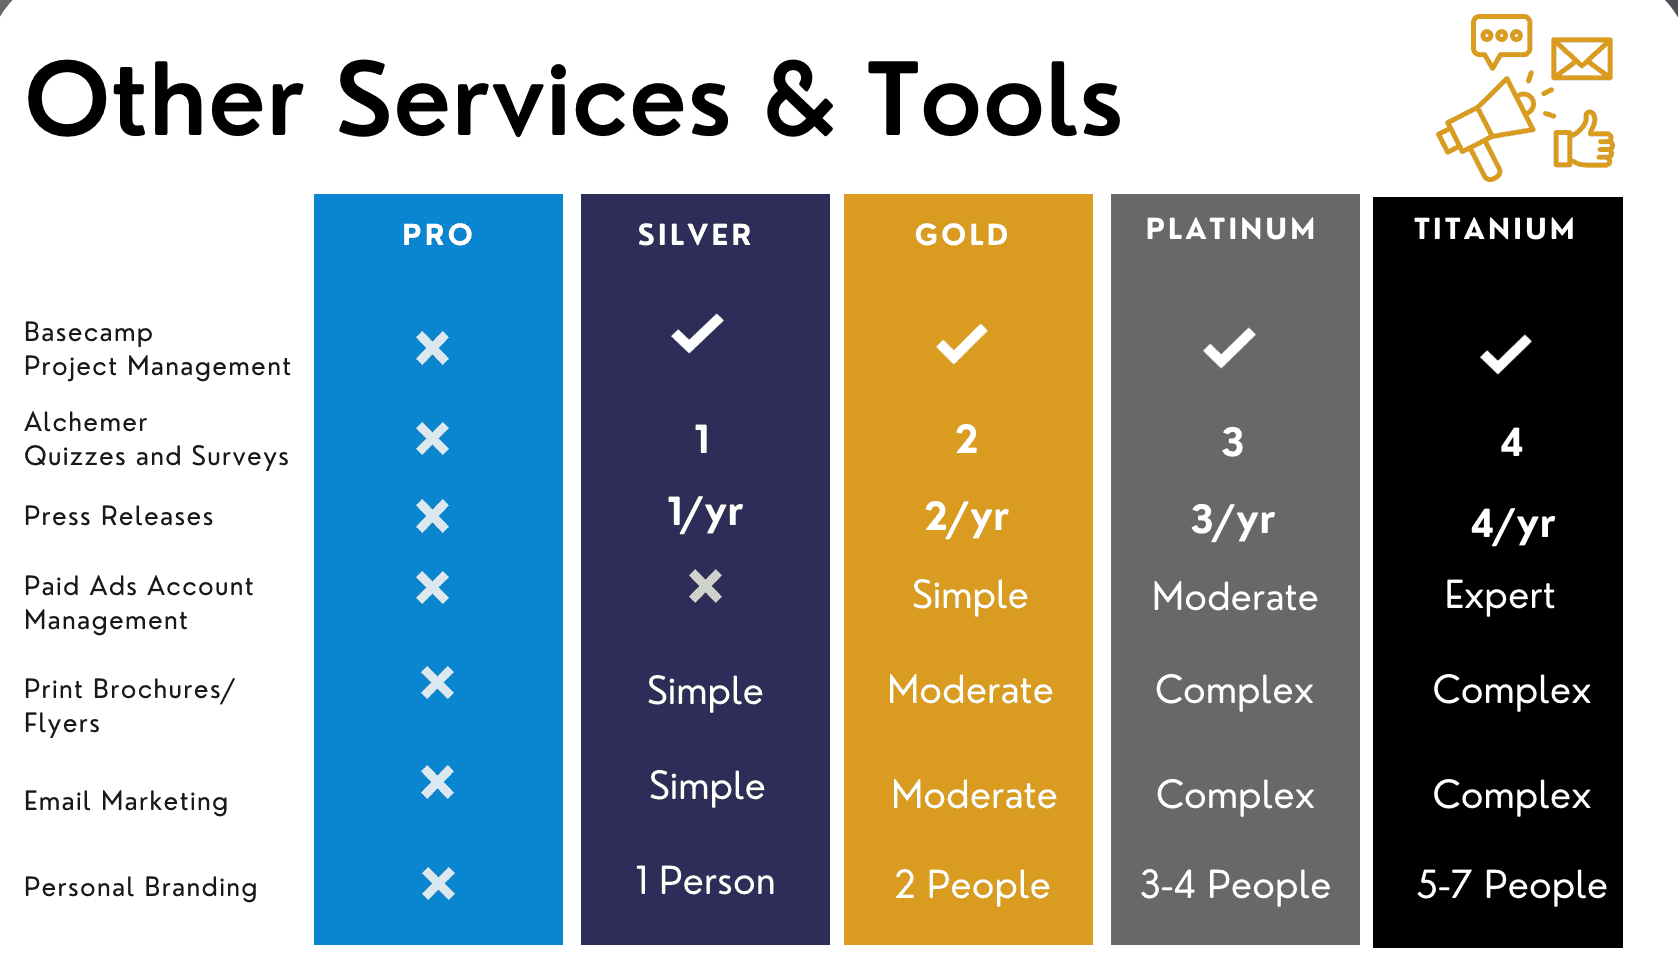 Marketing services & tools